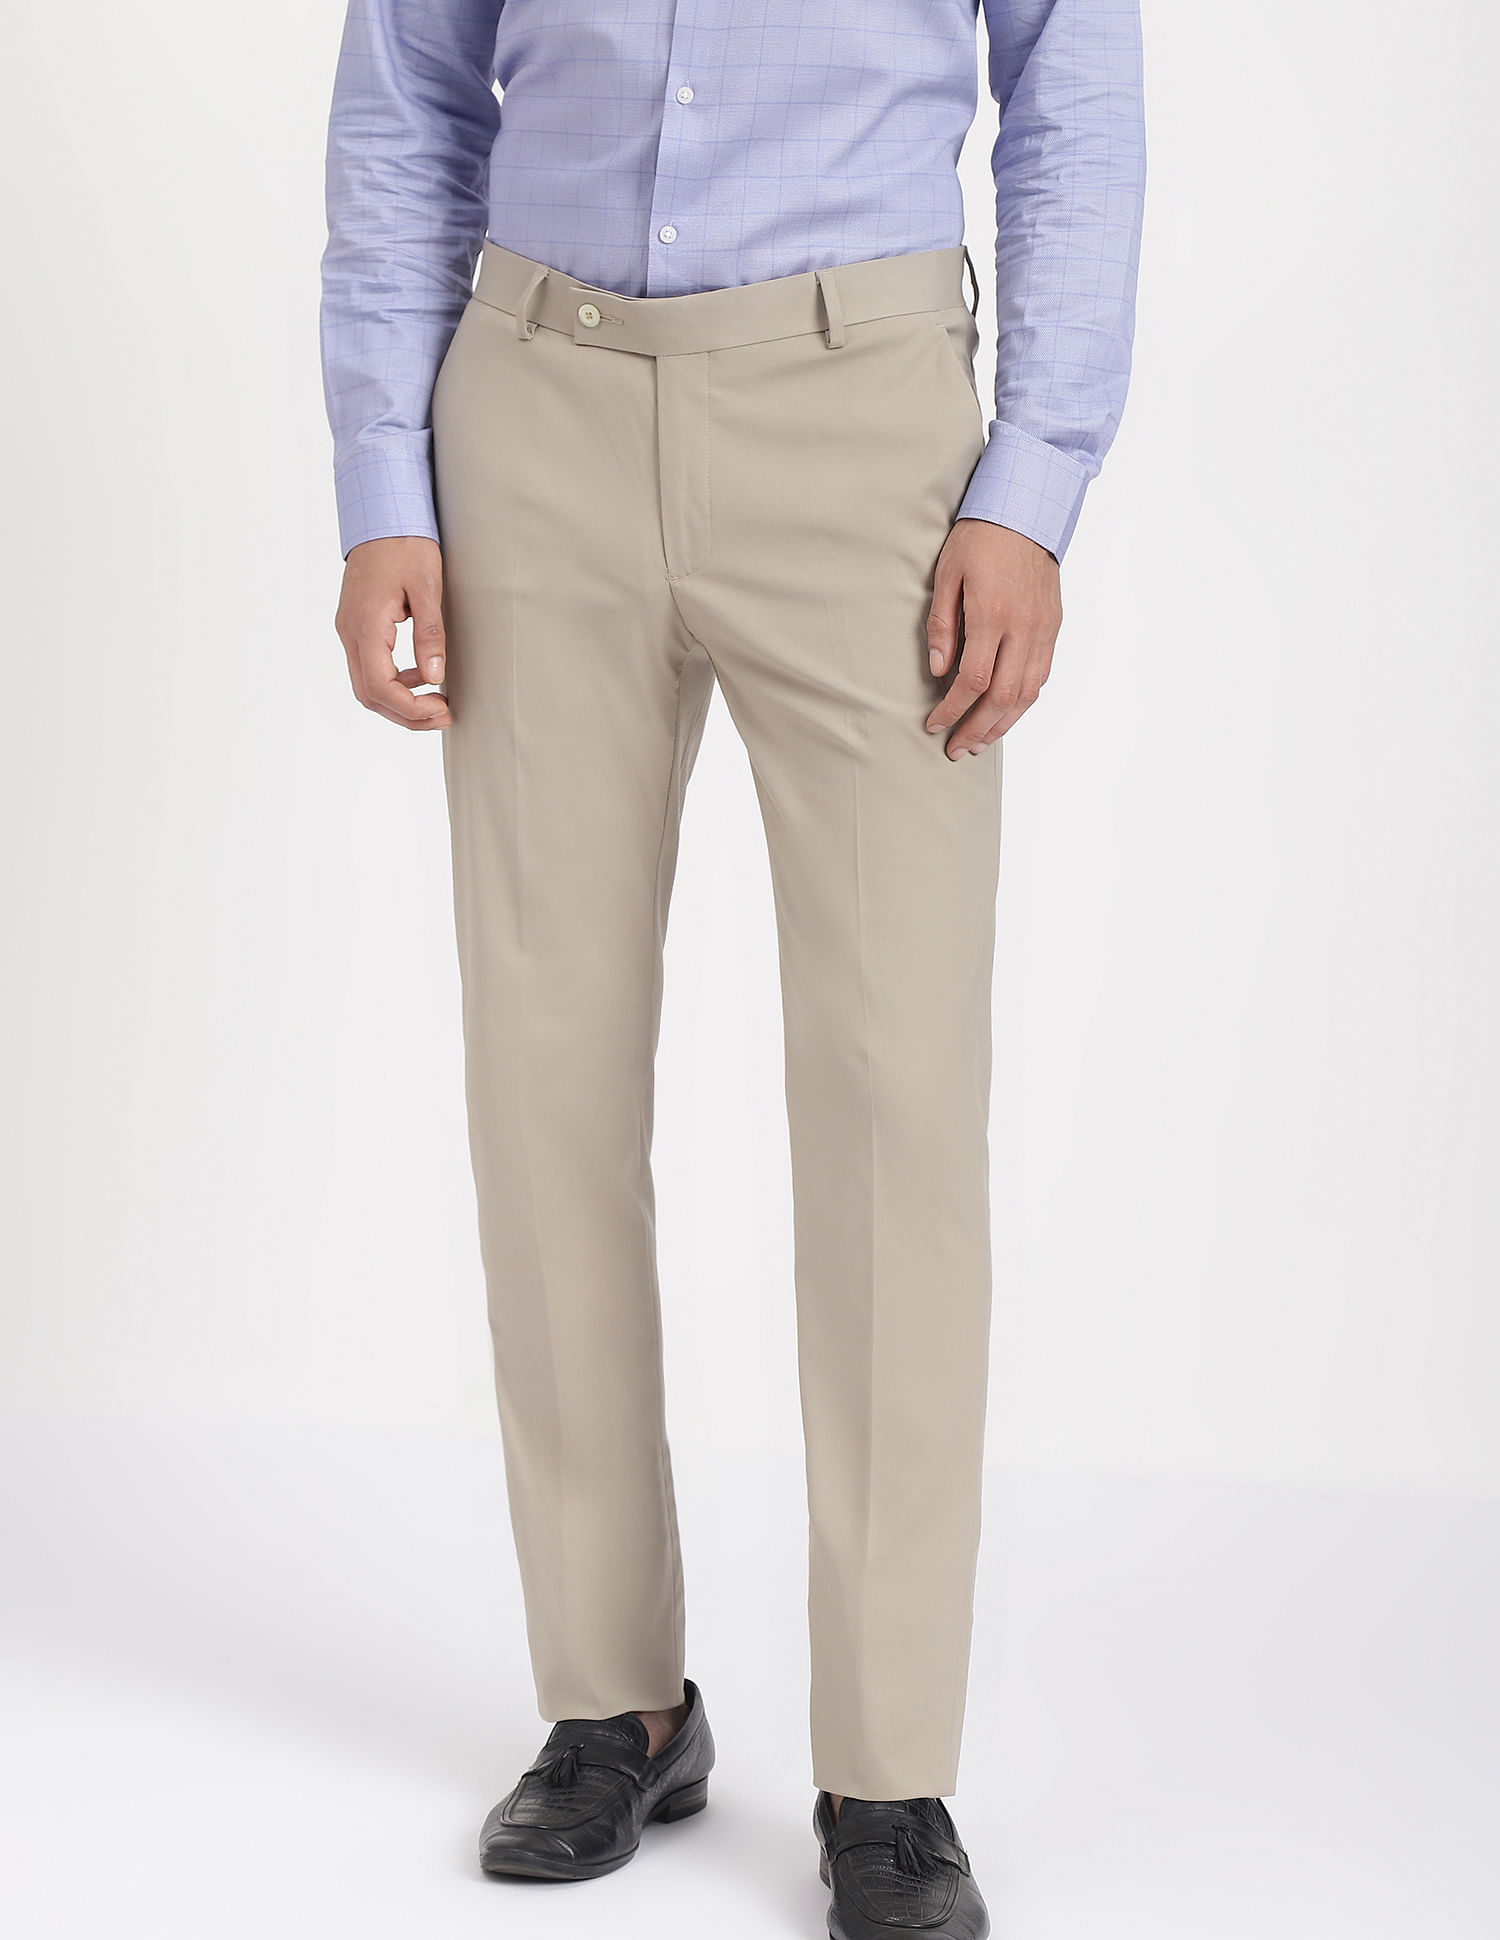 Can chinos be worn on formal occasions  Quora